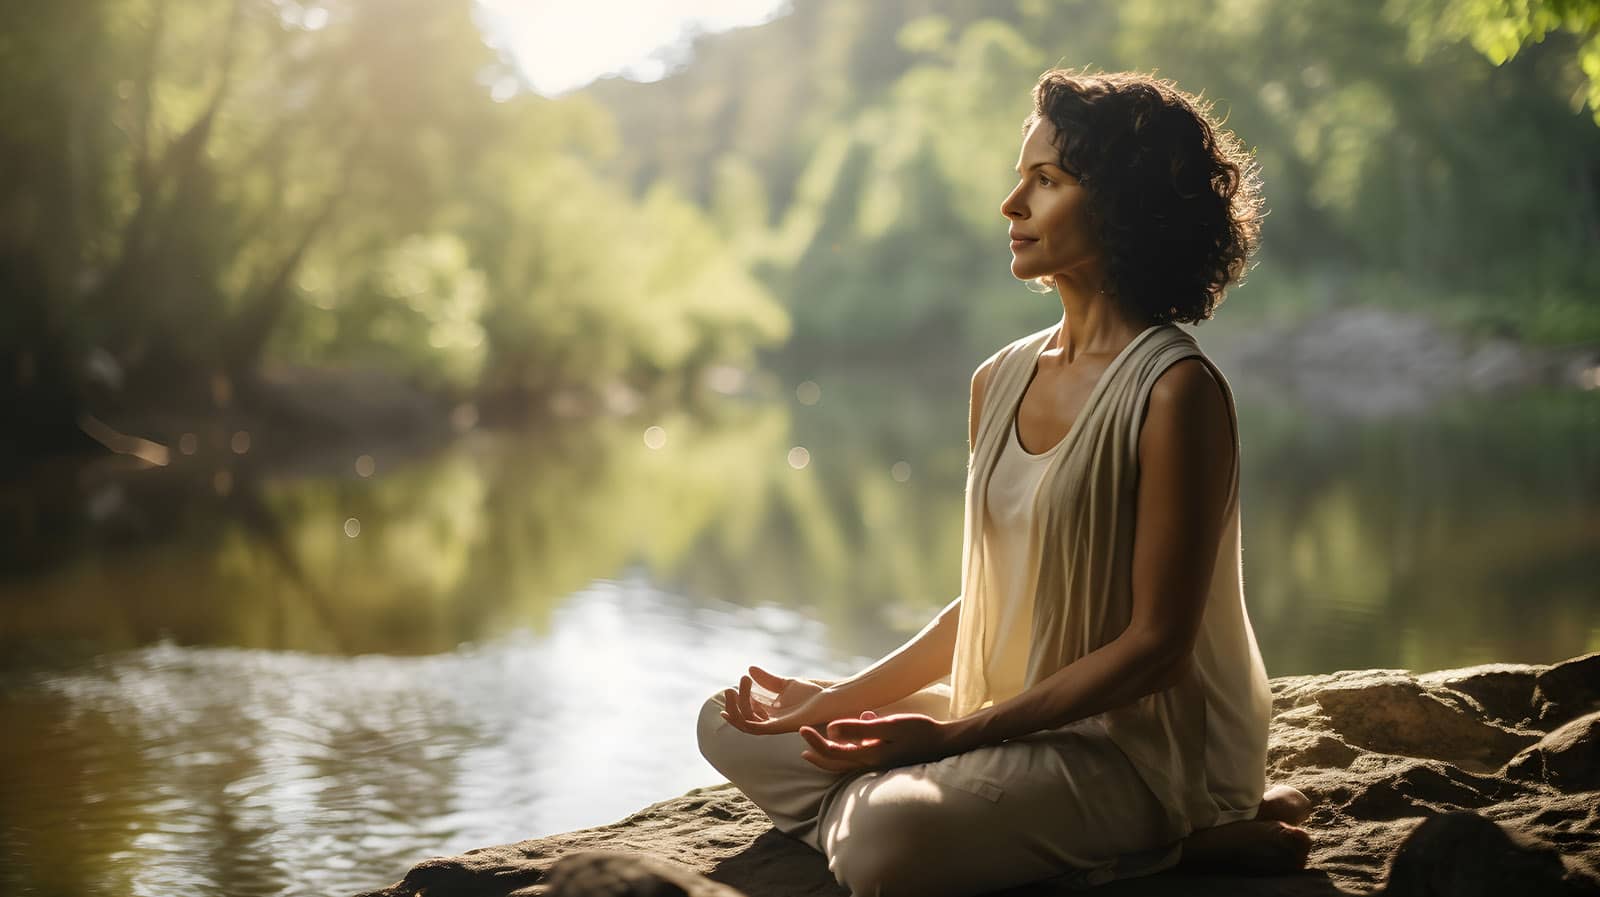 guided meditation for busy minds Woman sat mindfully meditating next to a river